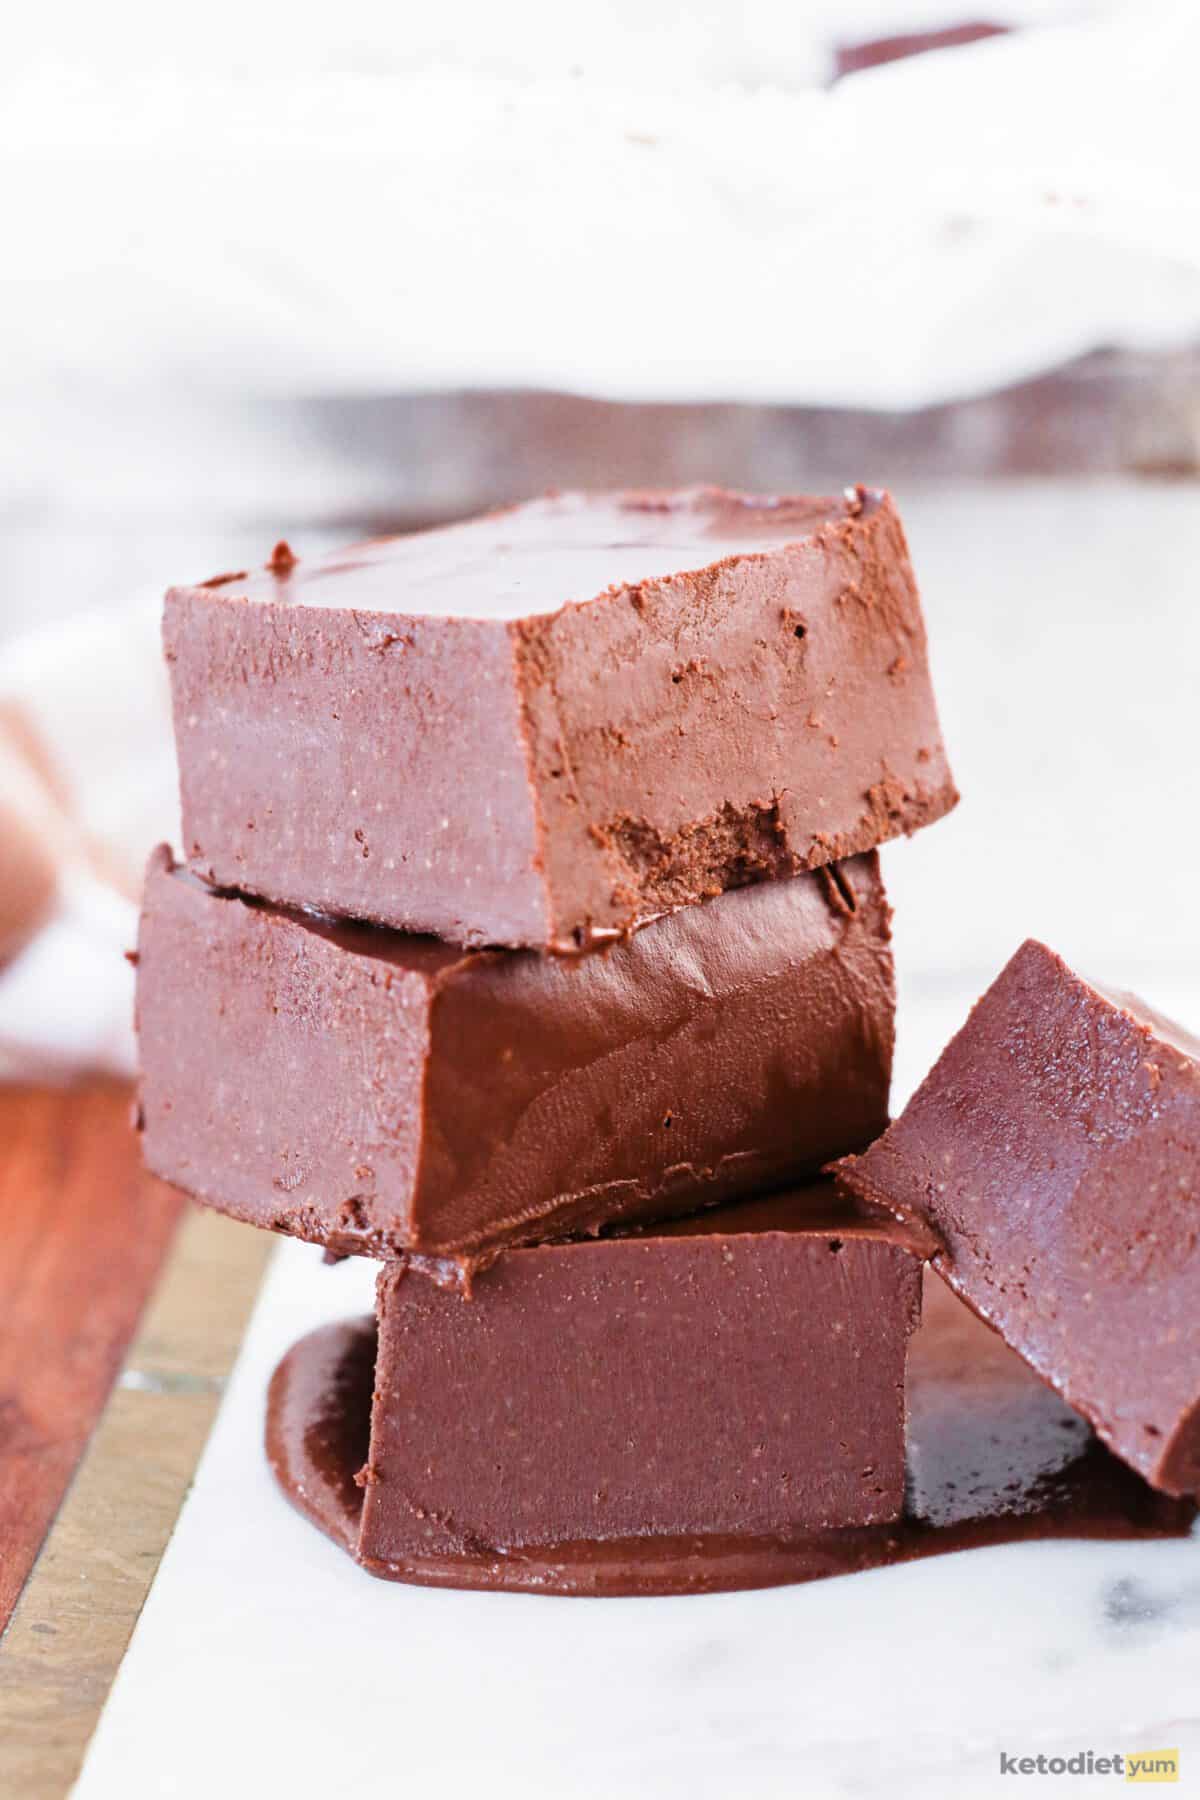 Delicious chocolate peanut butter fudge bars that are low carb and keto friendly